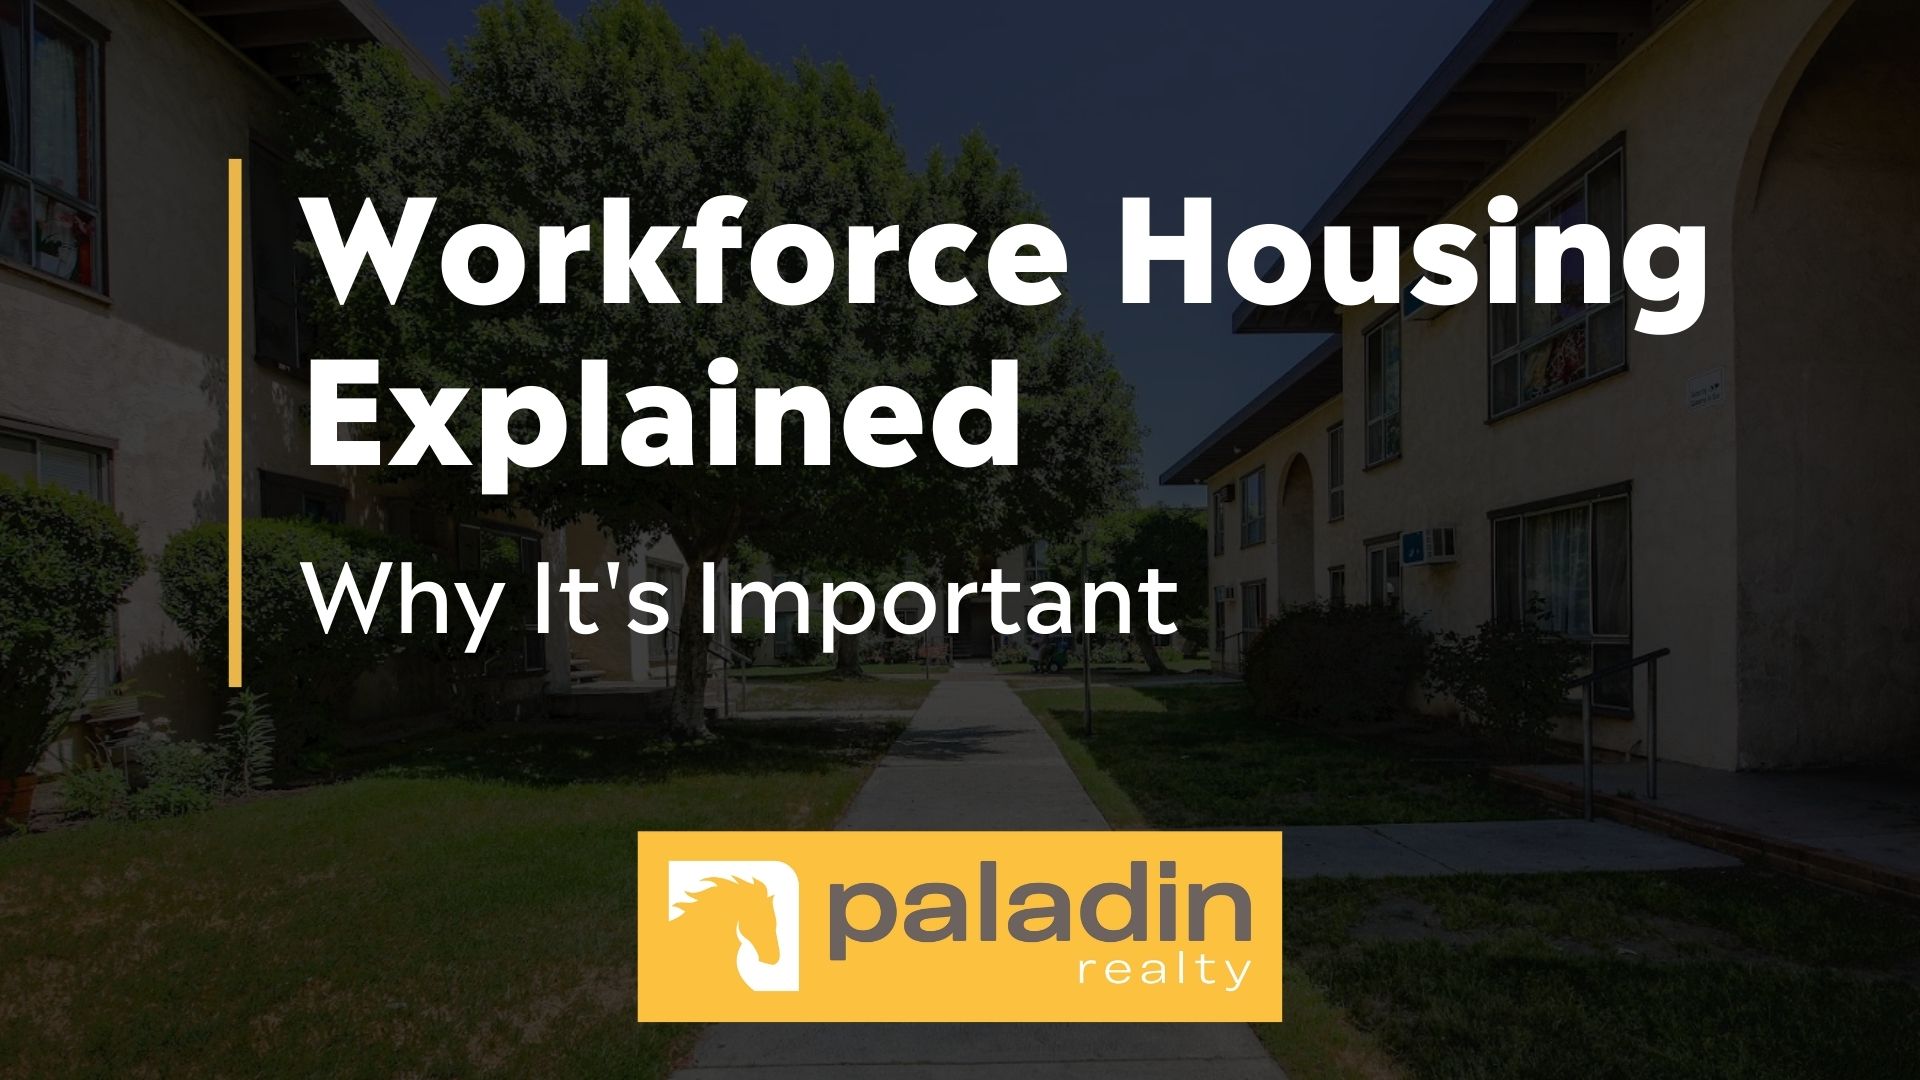 Fi - [web] - Workforce Housing Explained - Why Its Important